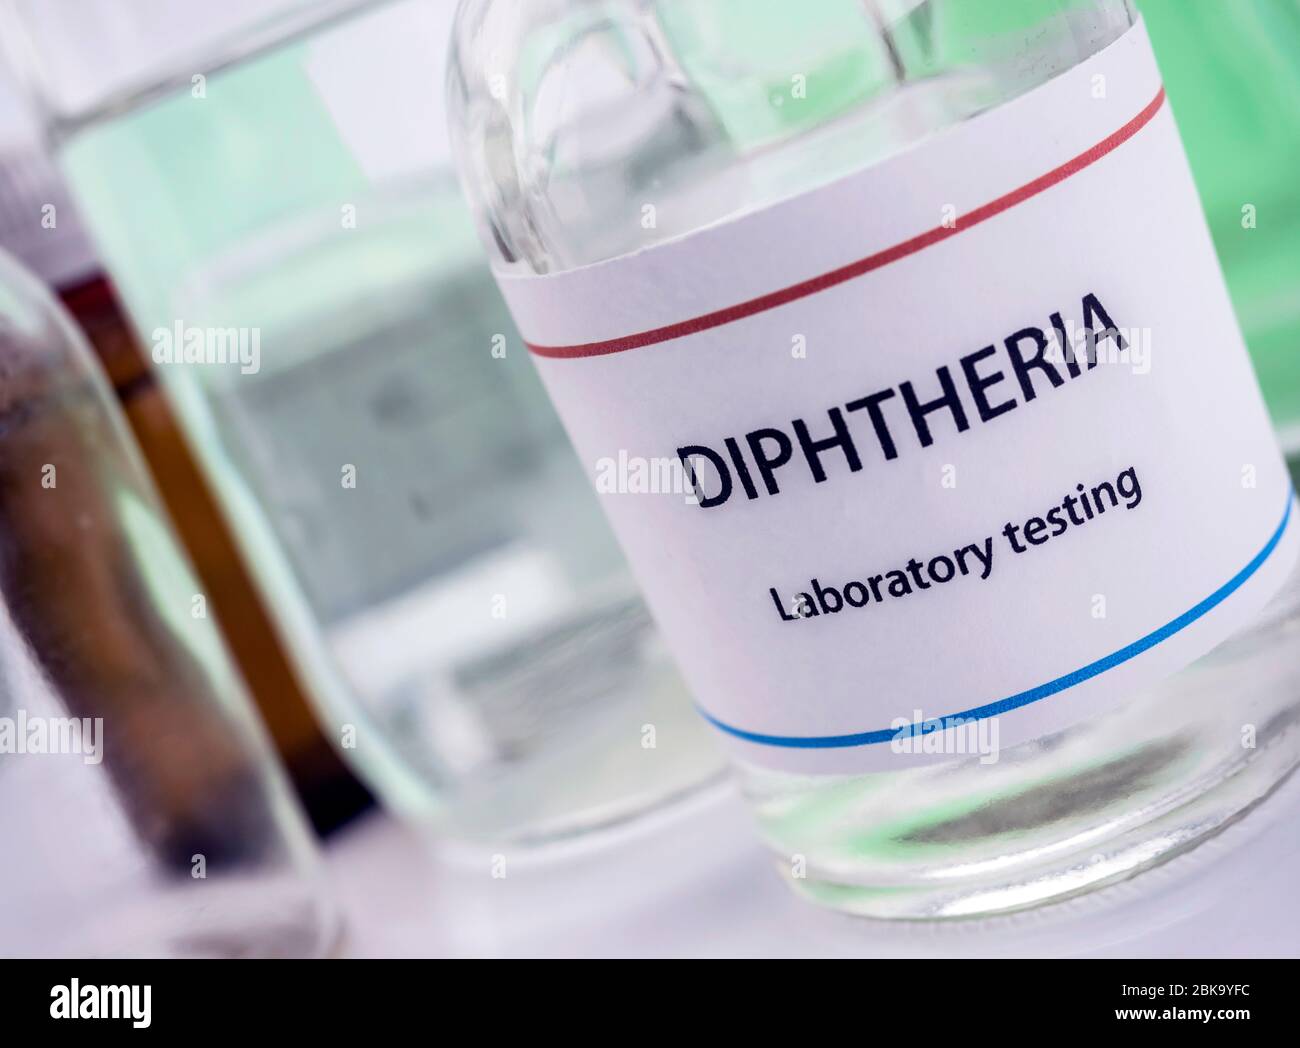 Test diphtheria in laboratory, conceptual image, composition horizontal Stock Photo